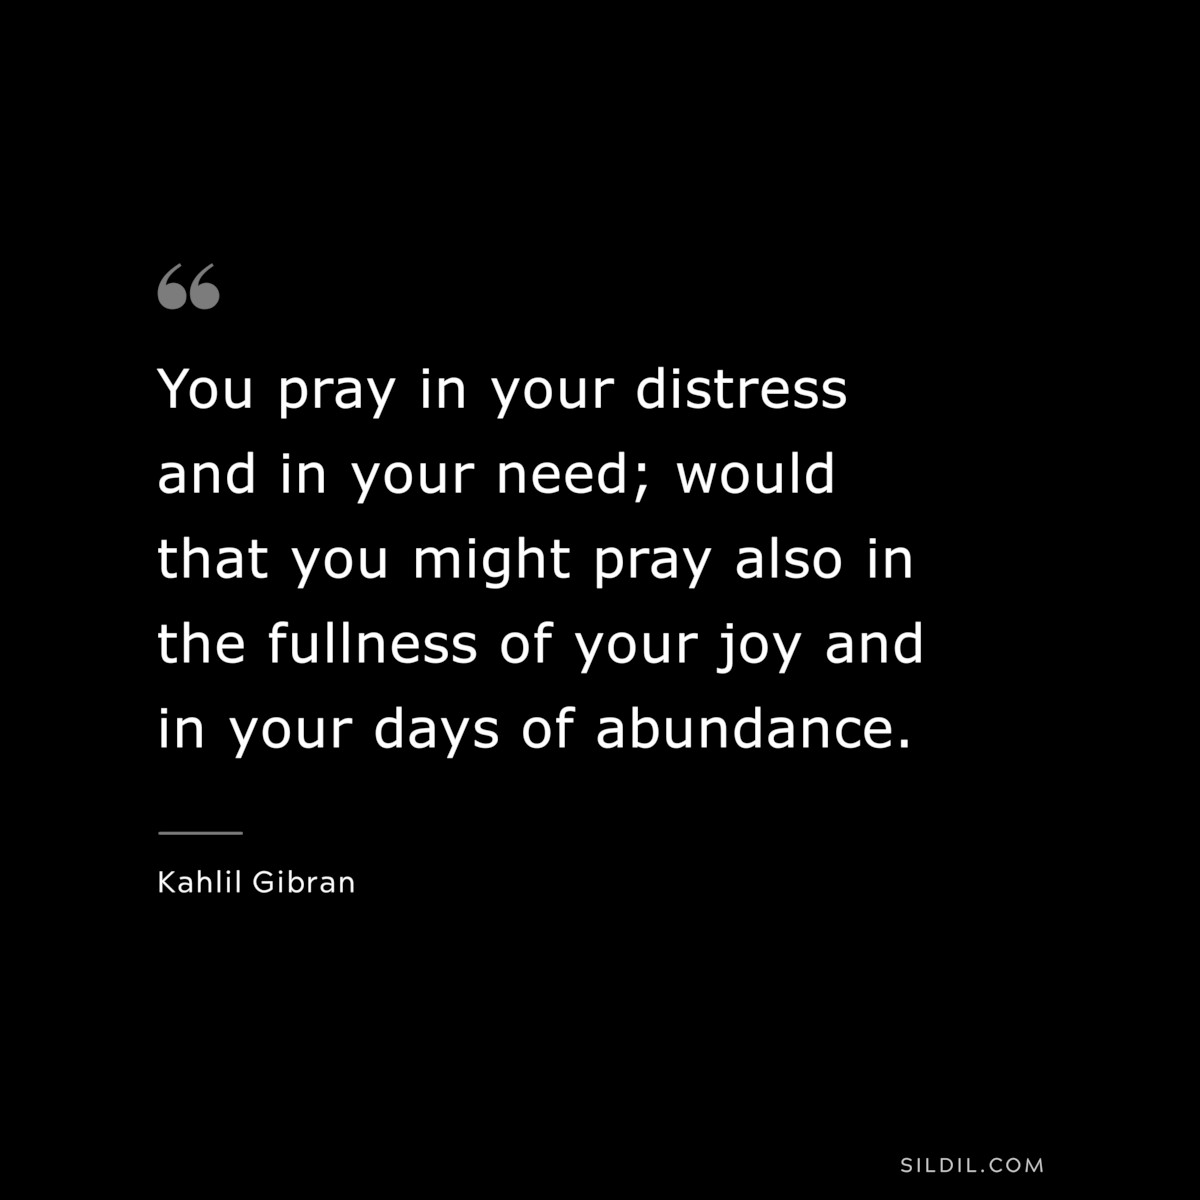 You pray in your distress and in your need; would that you might pray also in the fullness of your joy and in your days of abundance. ― Kahlil Gibran